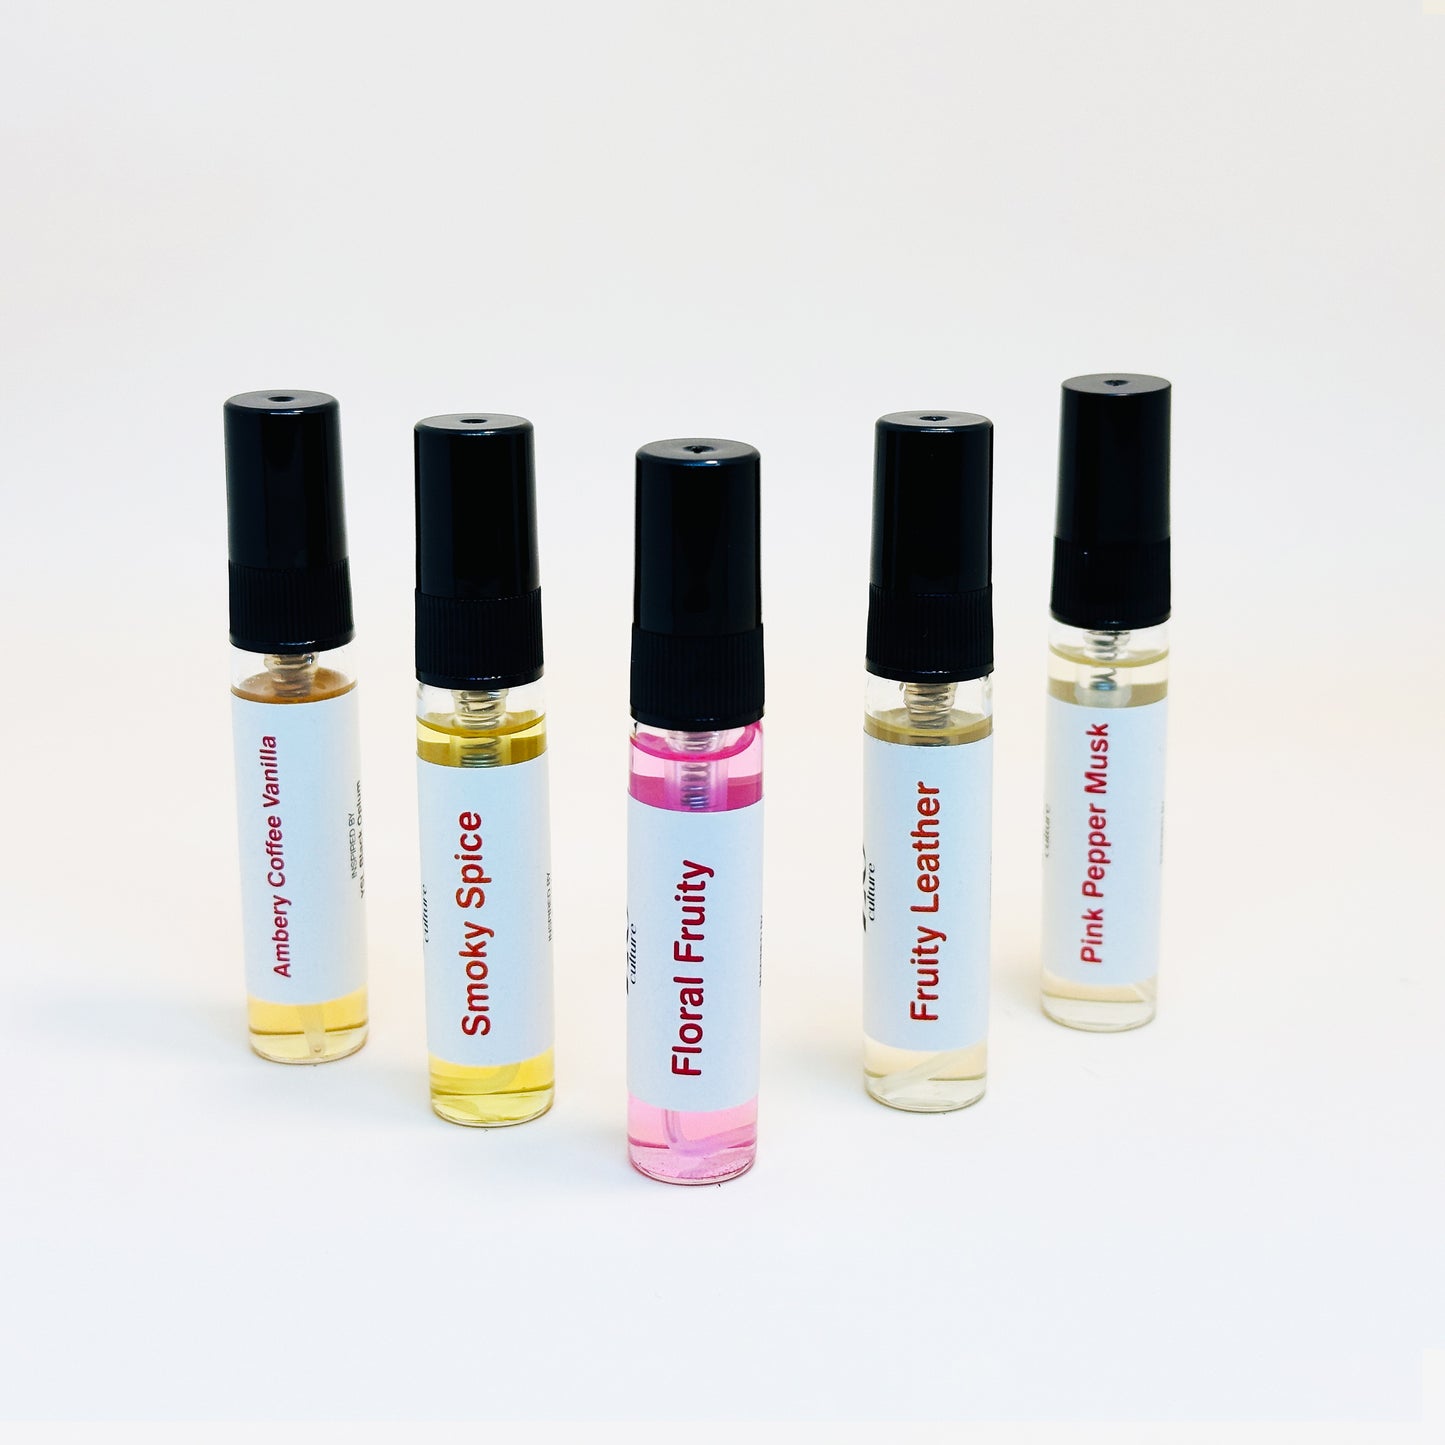 Testers Signature Women Scent Sampler Collection 1 ZoCulture